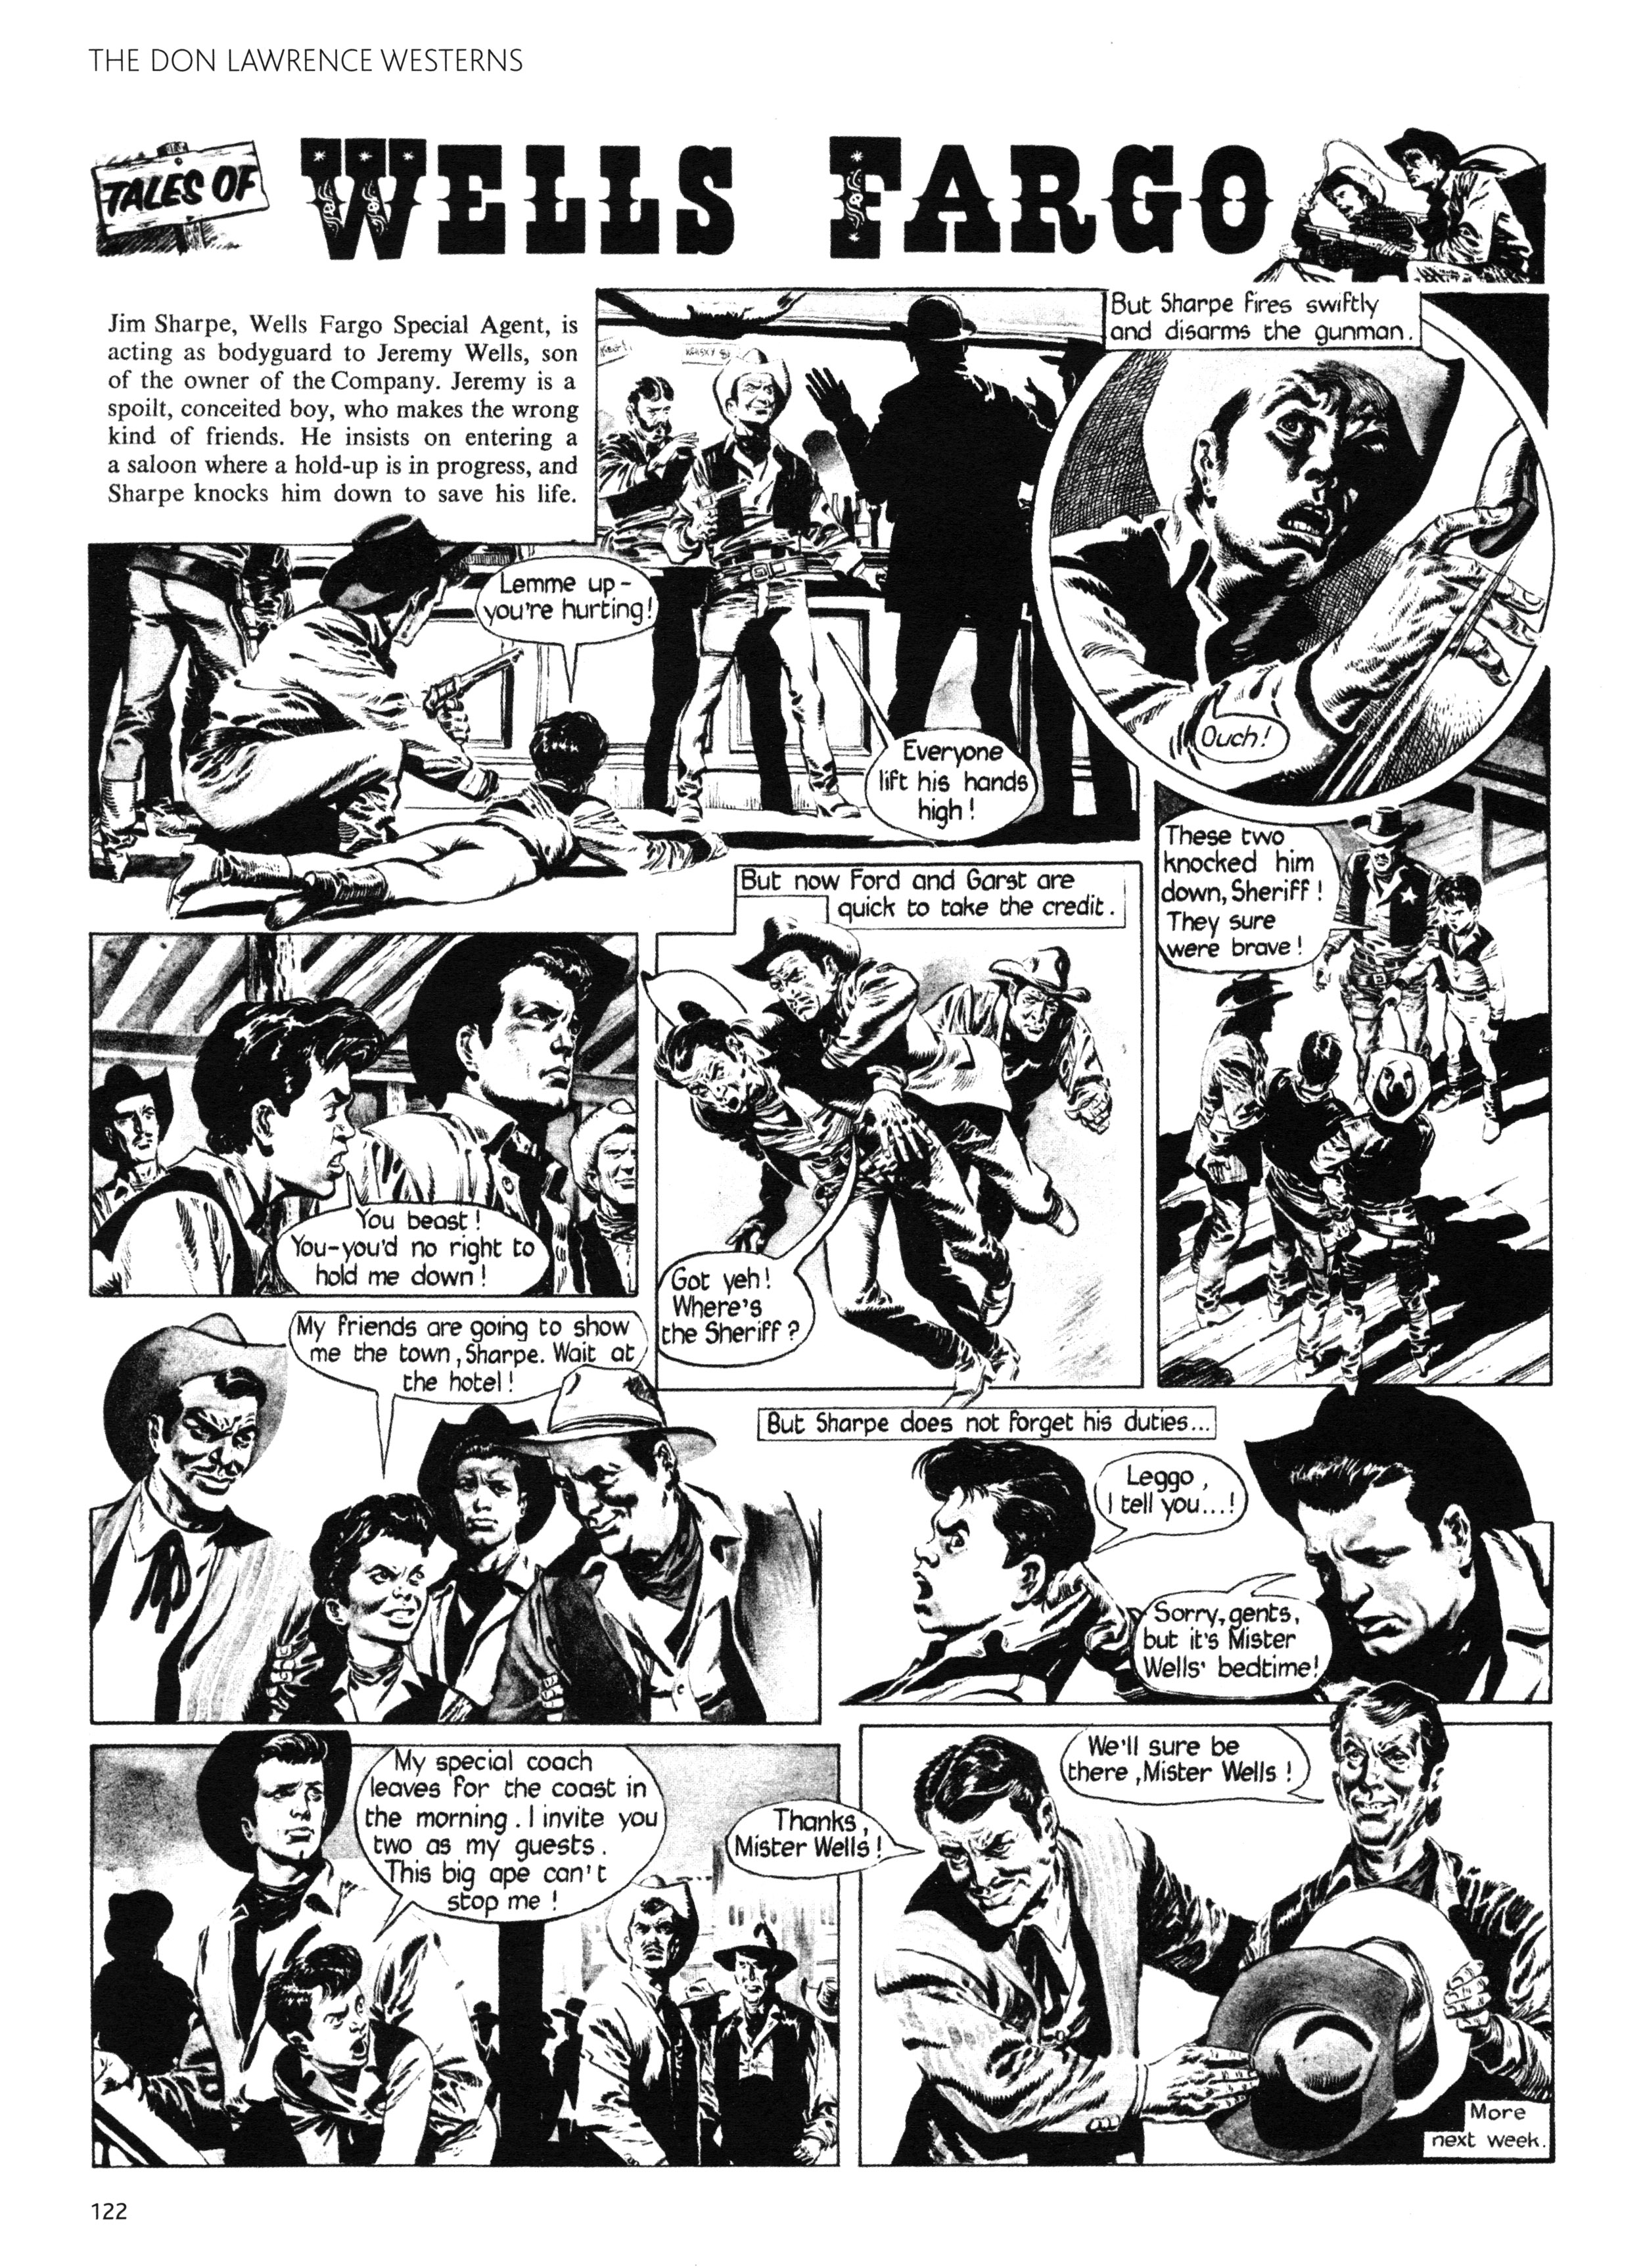 Read online Don Lawrence Westerns comic -  Issue # TPB (Part 2) - 23